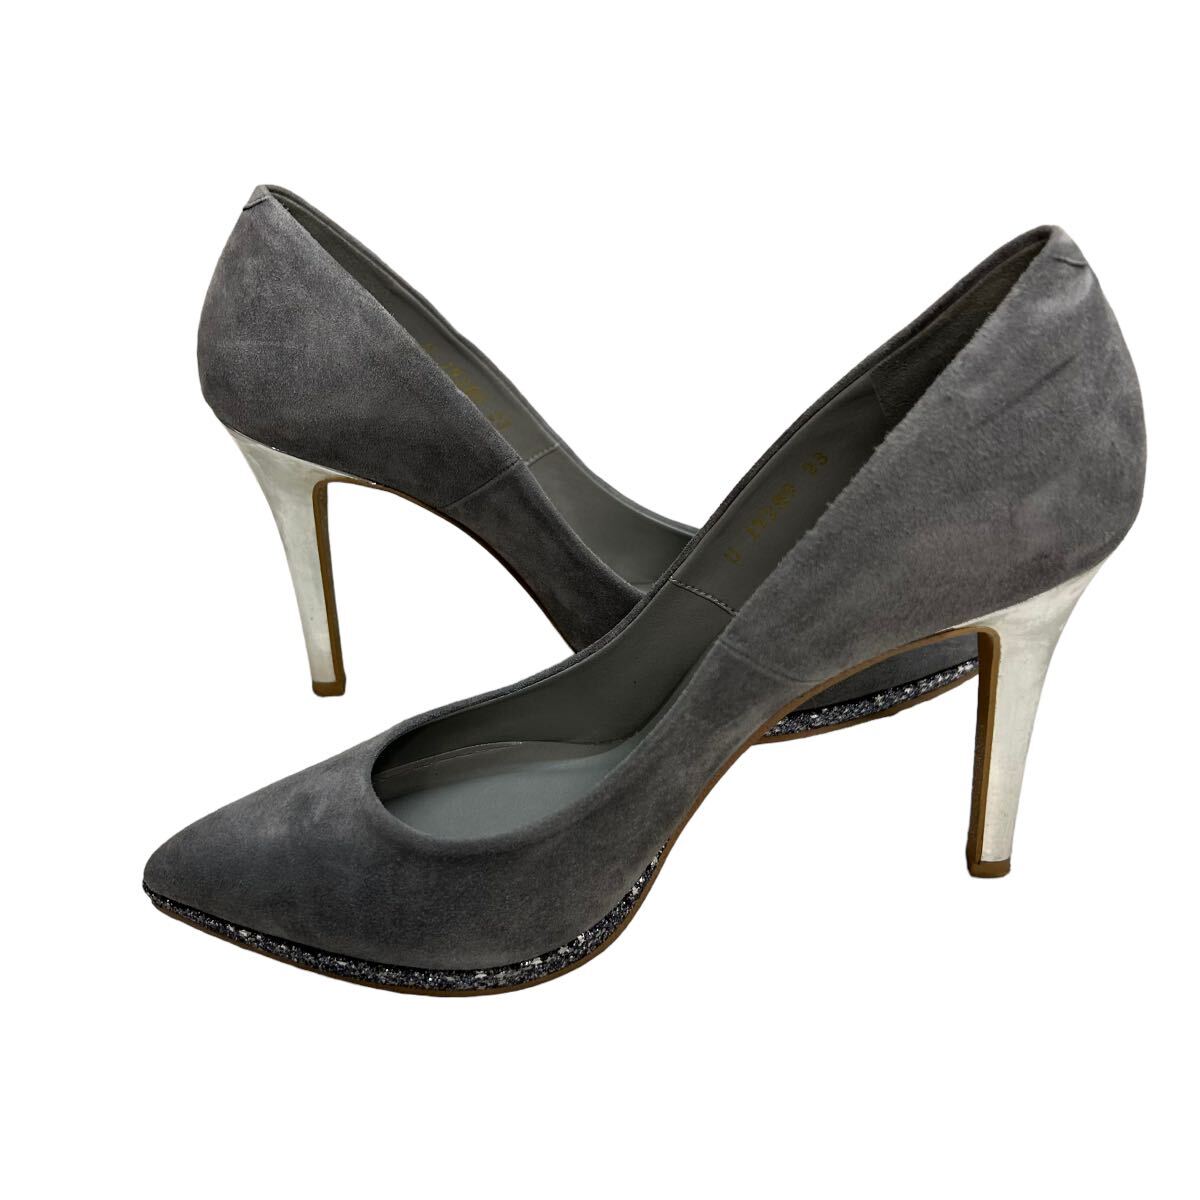 A622 DIANA Diana lady's pumps high heel 23cm gray silver suede lame made in Japan 